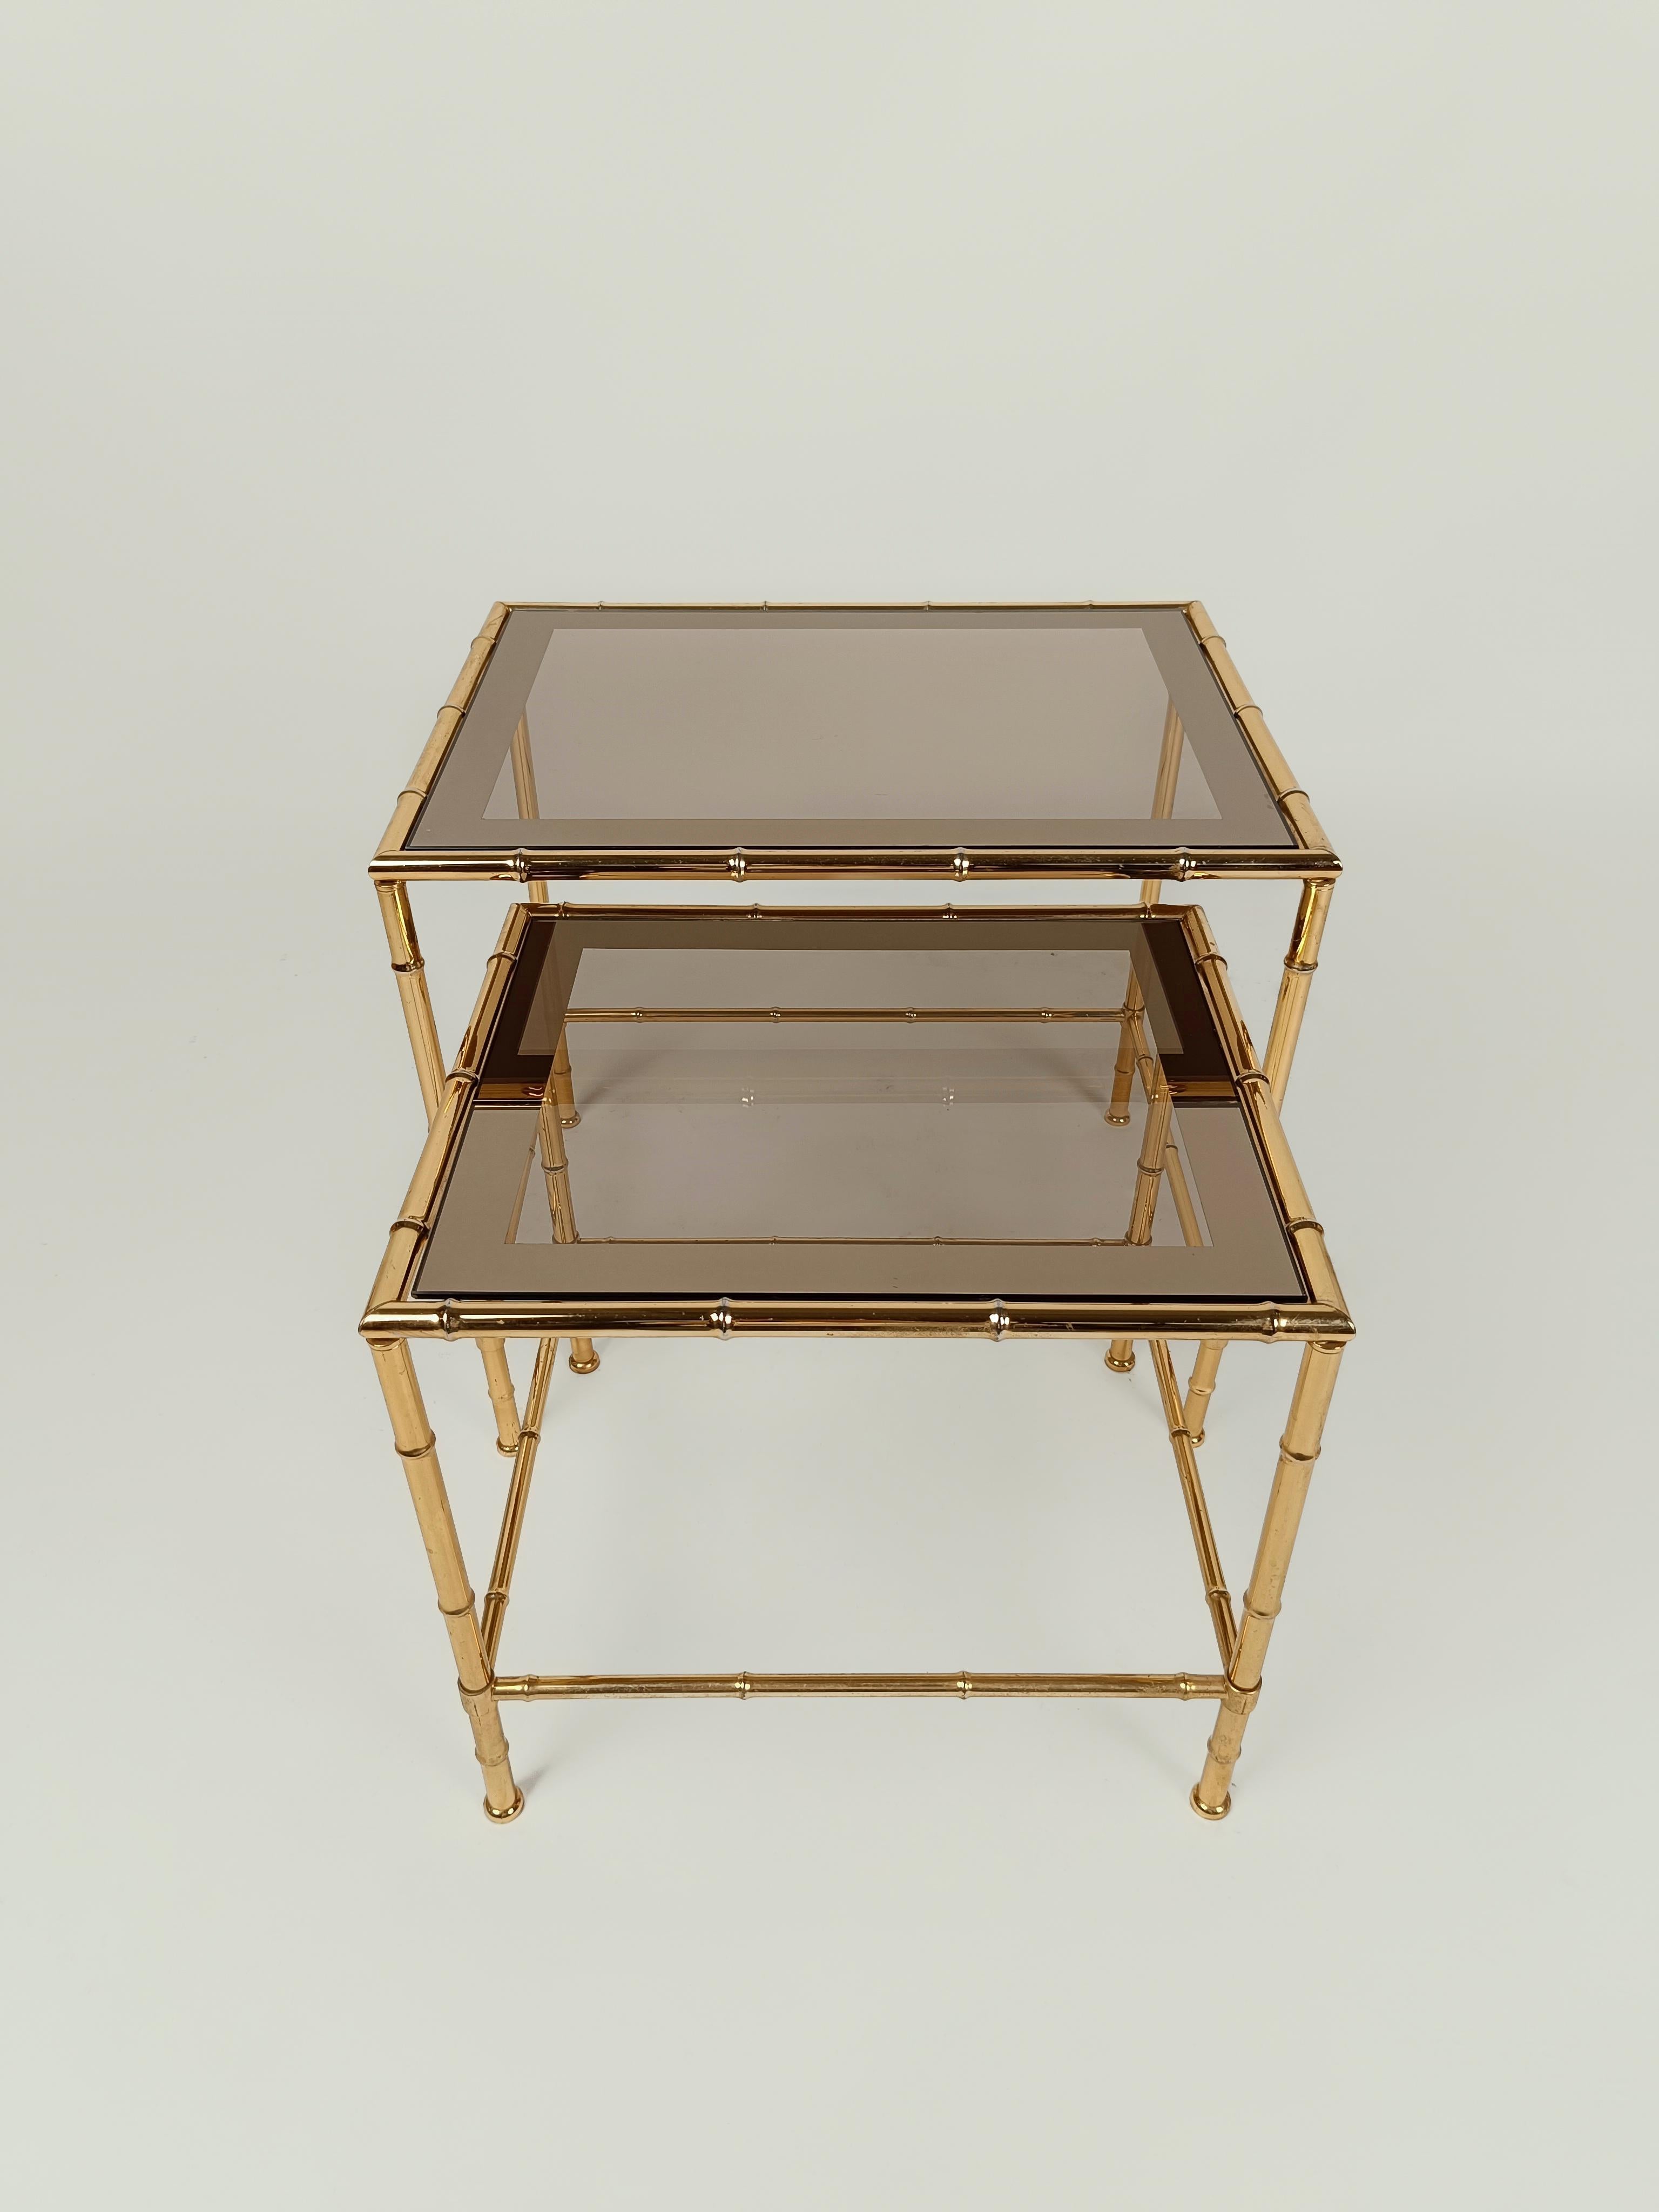 Italiano Midcentury Nesting Table in Brass Faux Bamboo and Fumè Mirrored Glass For Sale 2